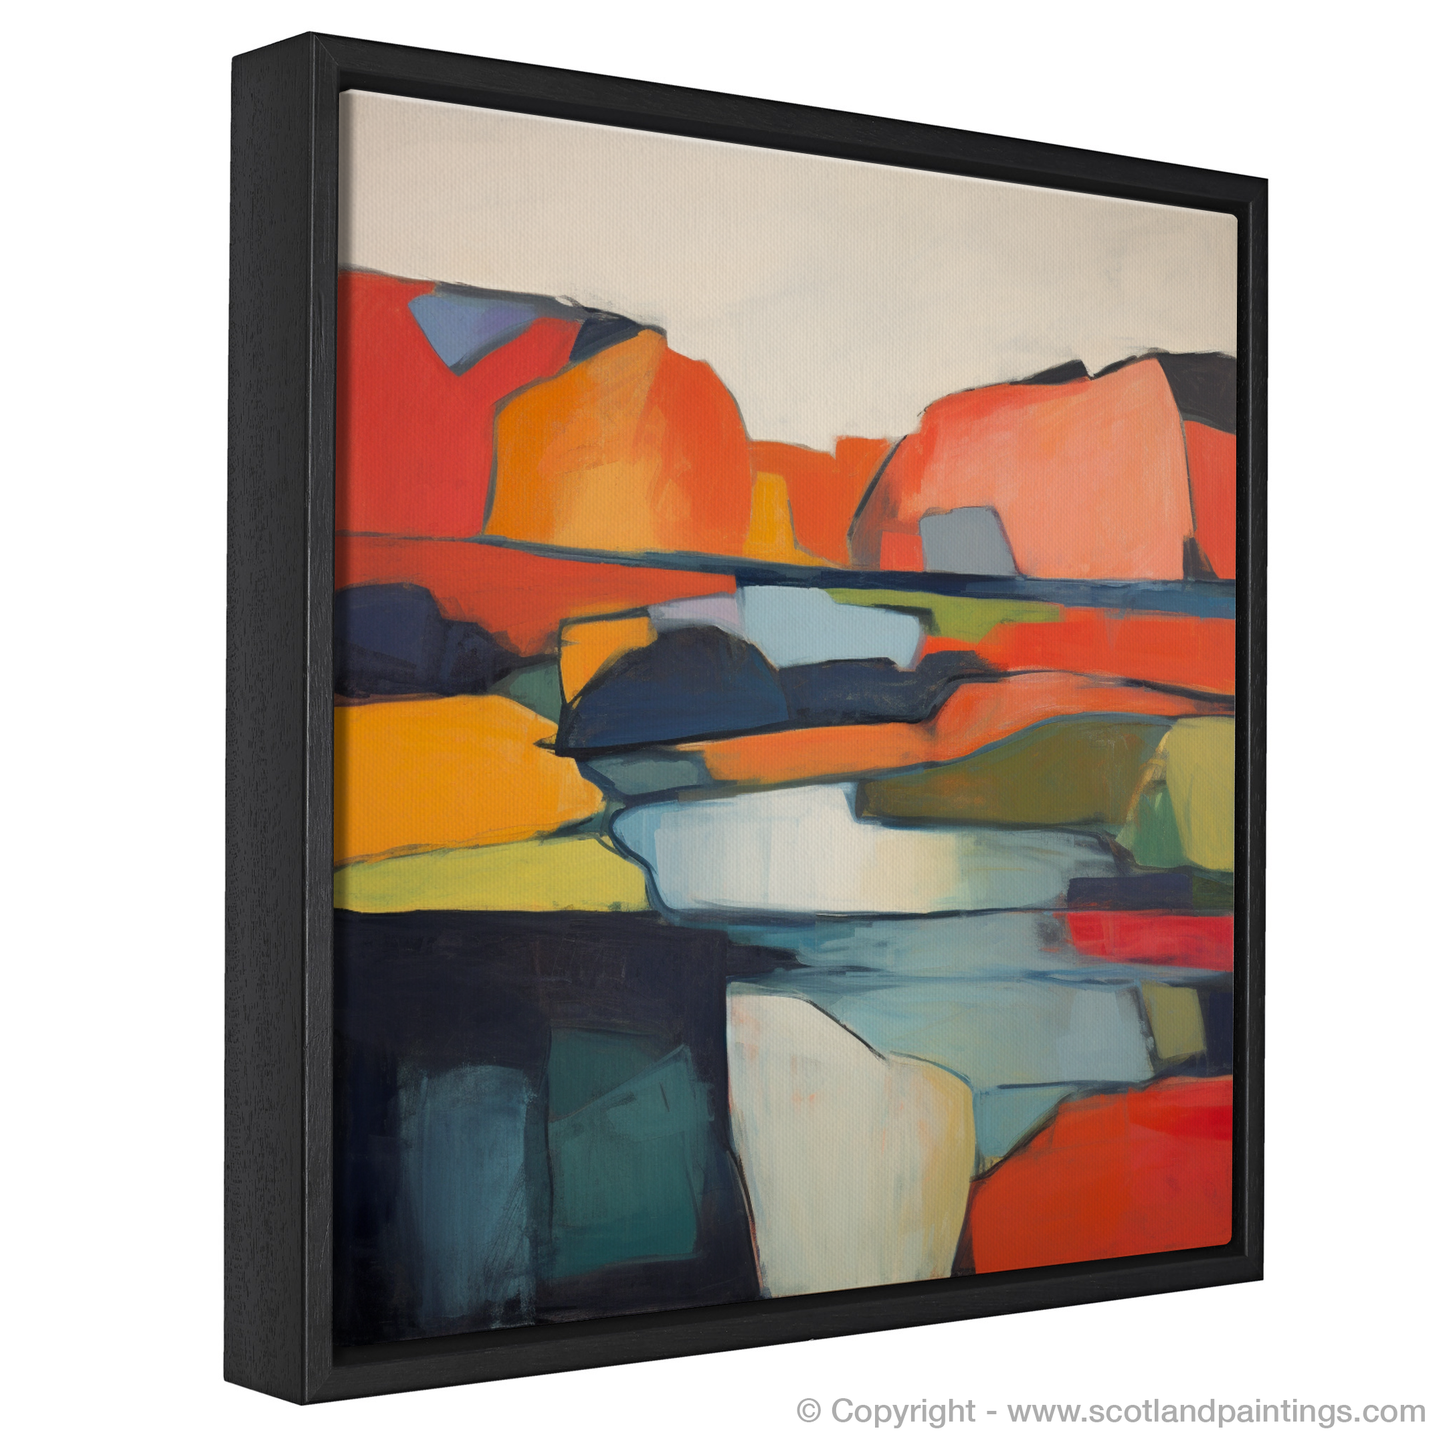 Painting and Art Print of A loch in Scotland entitled "Scottish Loch at Sunset: An Abstract Interpretation".